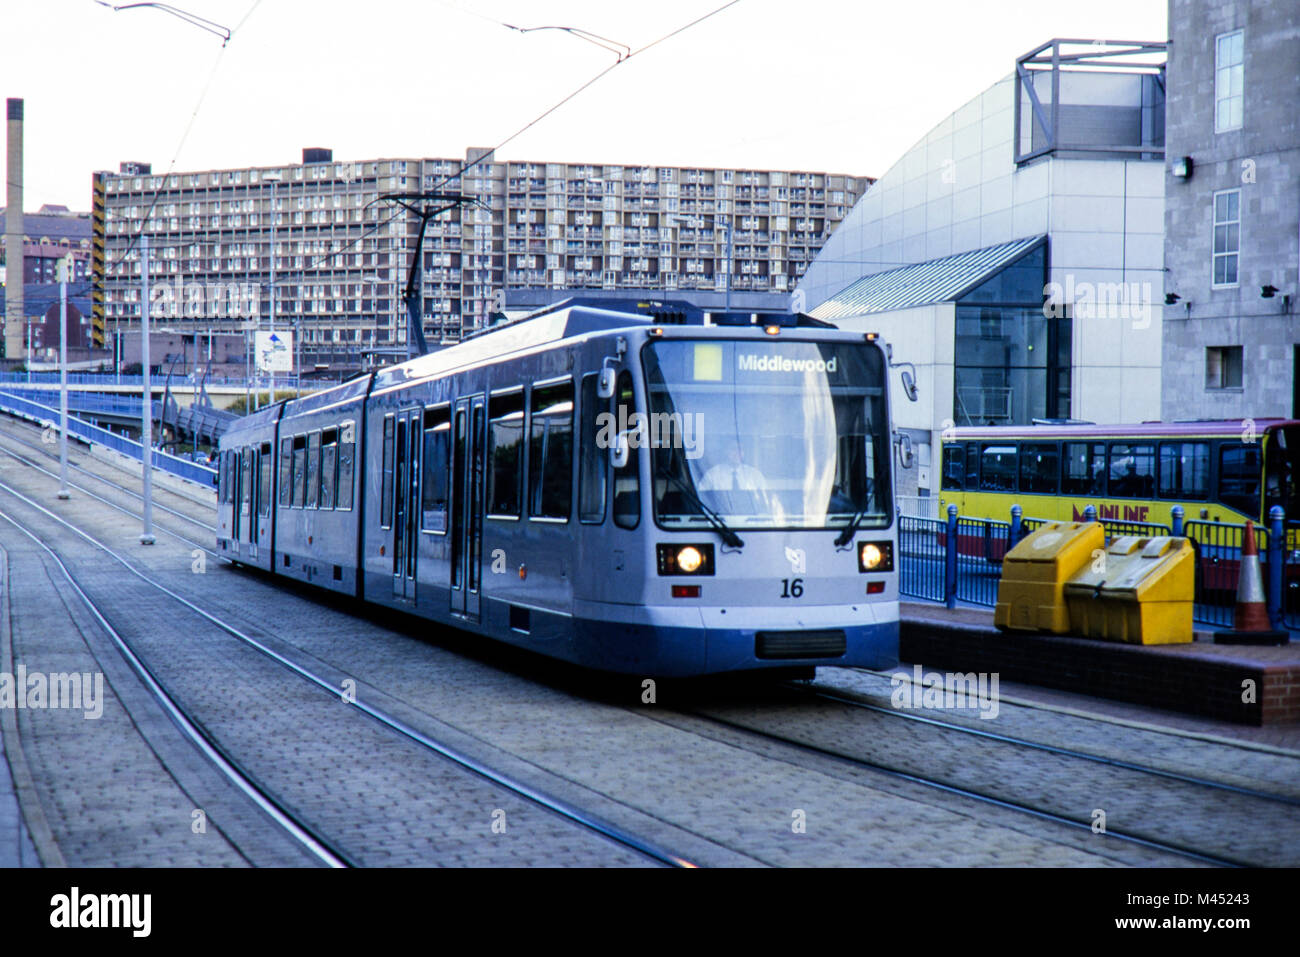 Sheffield Super Tram No16 with original livery on route to Middlewood. Image taken in August 1996 Stock Photo